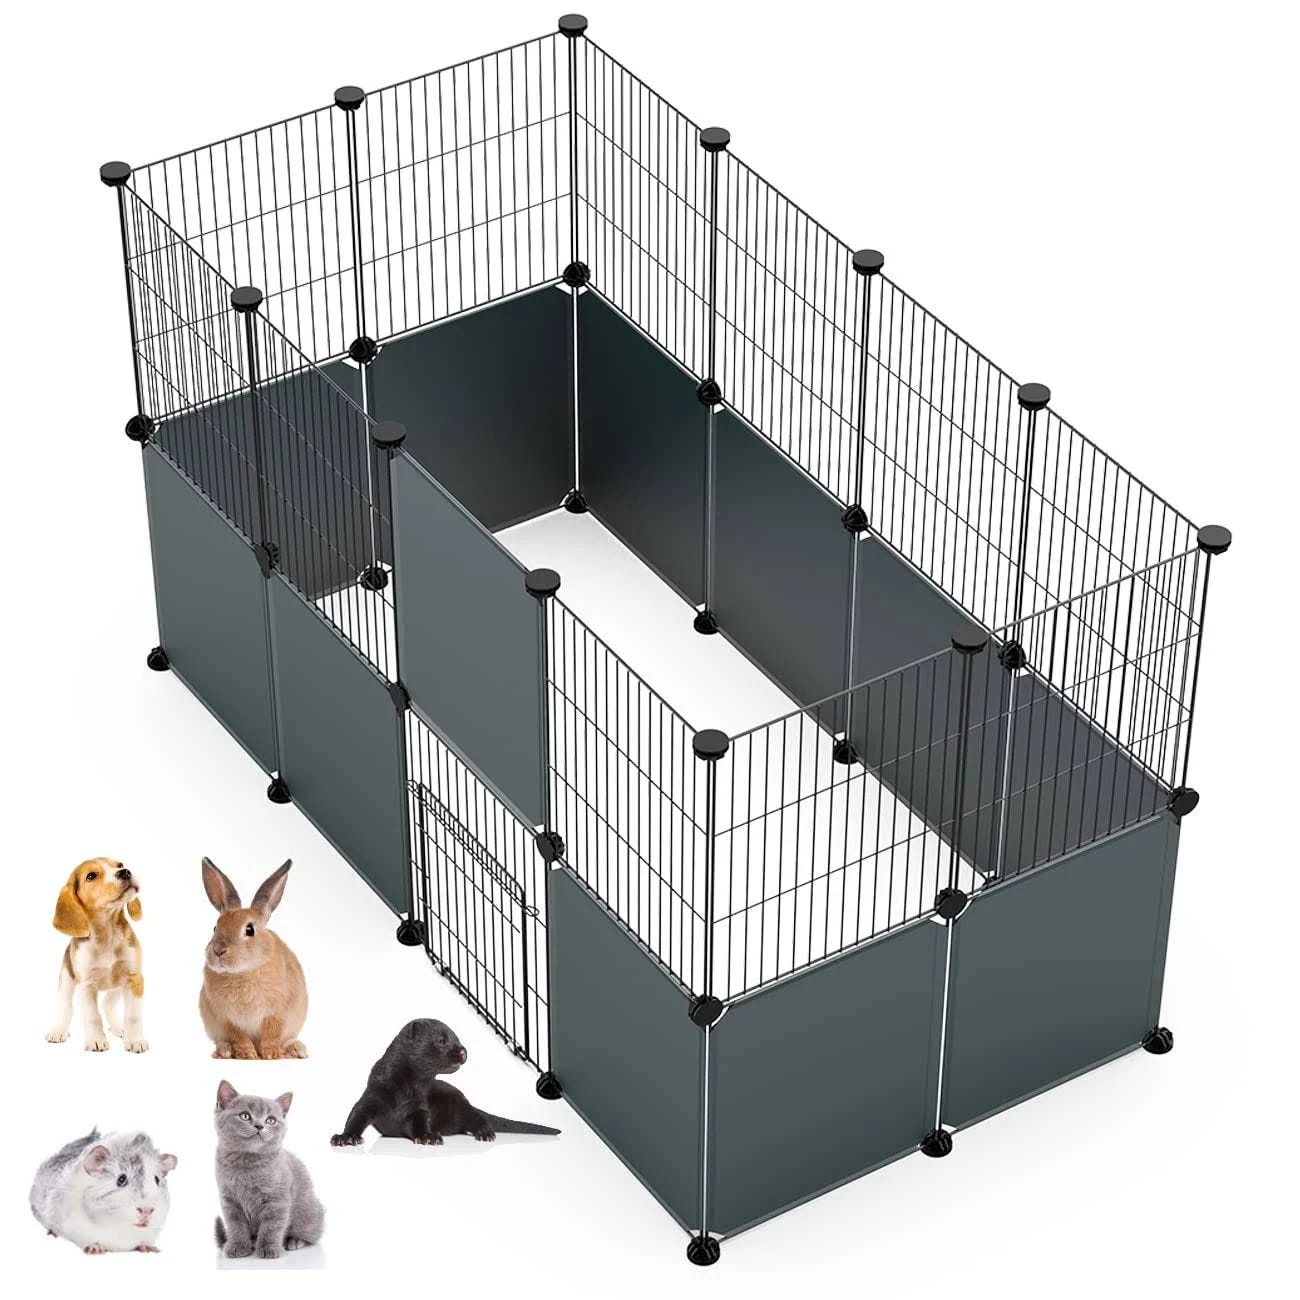 DIY Small Animal Playpen for Various Pets | Image